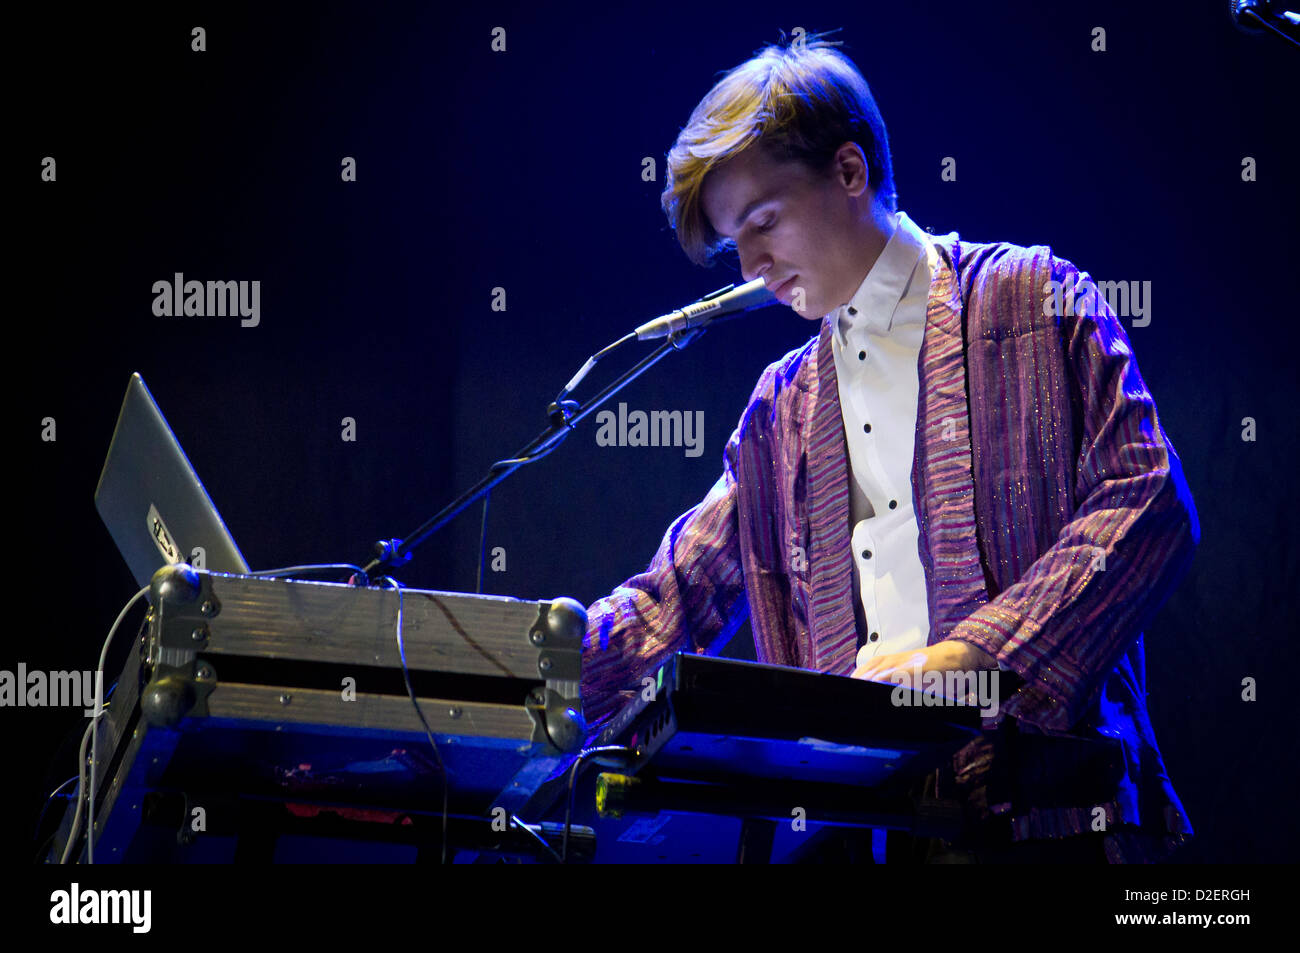 November 20, 2012 - The eglish indie-rock band Spector performs at the Mediolanum Forum, Assago, Milan, Italy Stock Photo